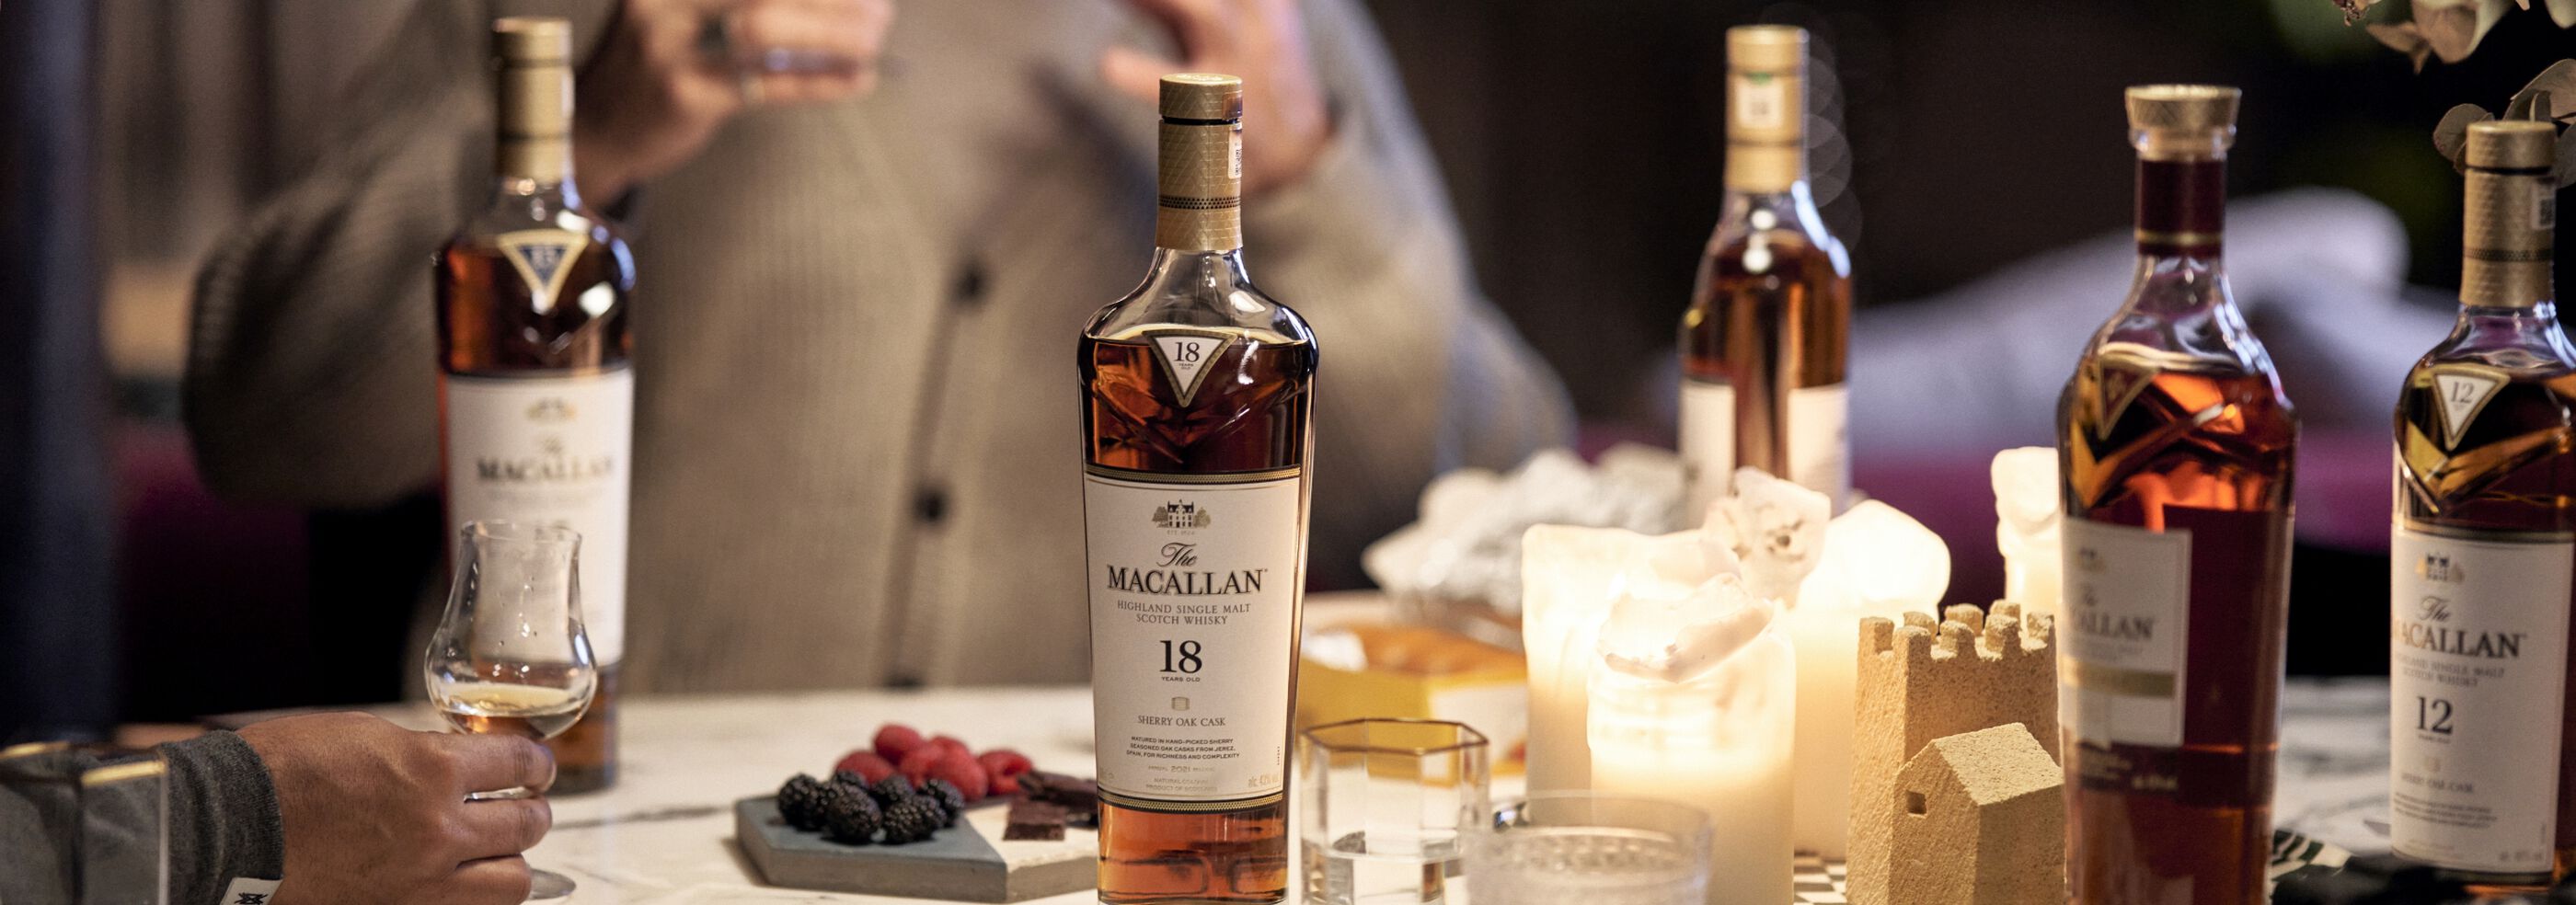 A dinner setting with several bottles of The Macallan of various vintages.